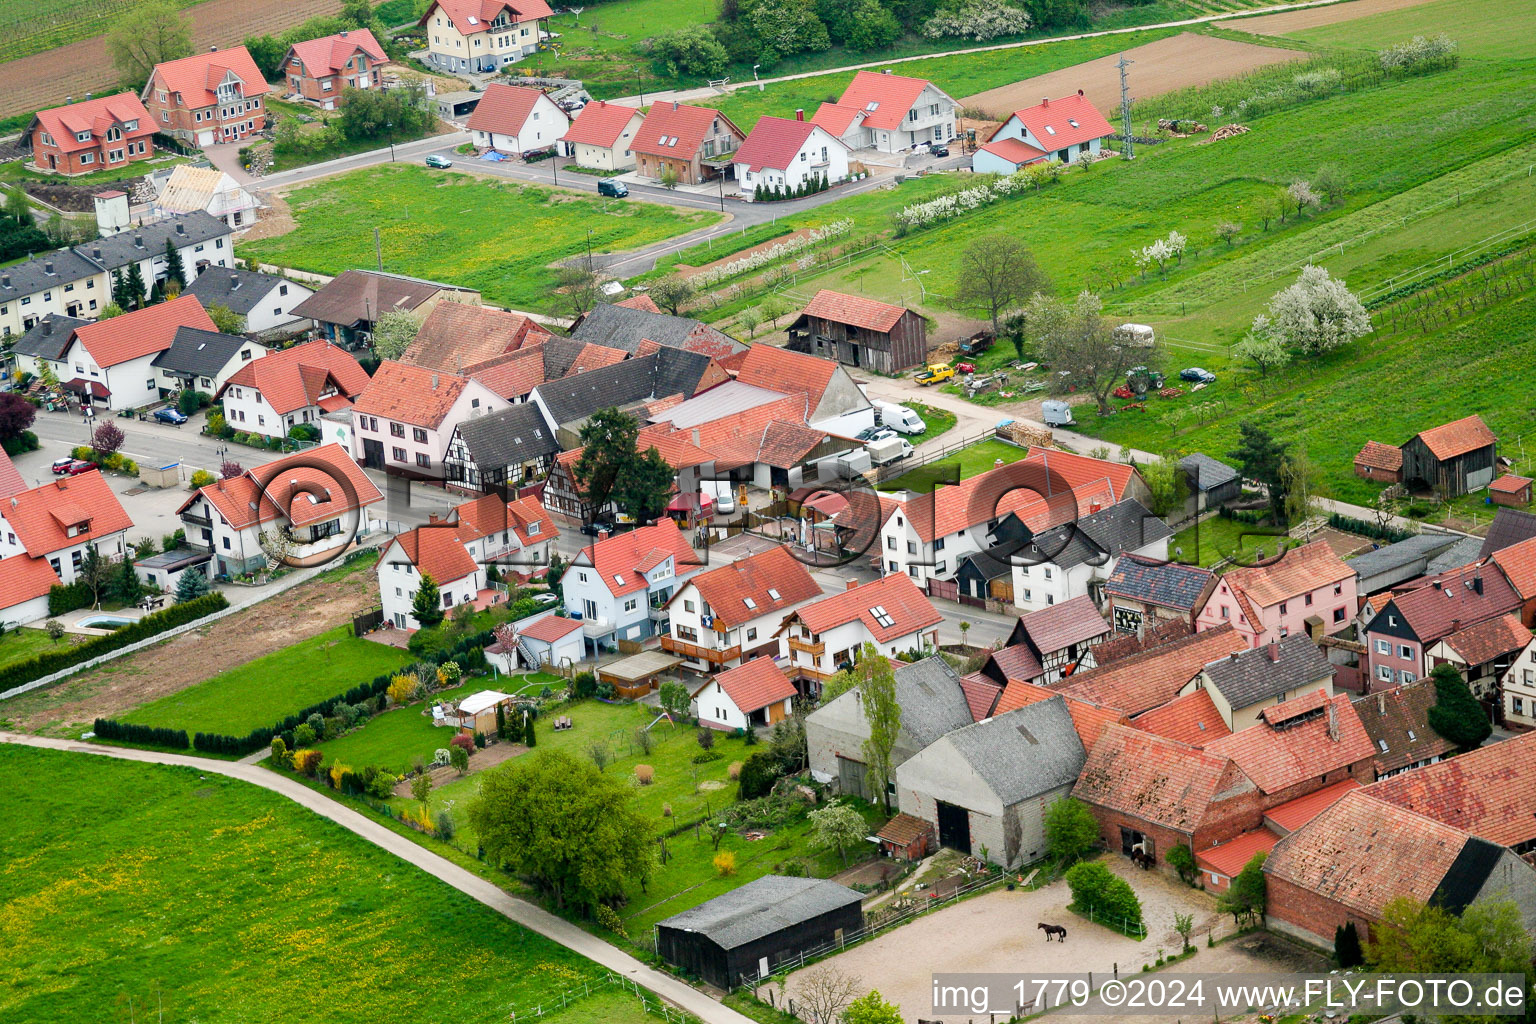 Aerial view of Village - view on the edge of agricultural fields and farmland in Hergersweiler in the state Rhineland-Palatinate